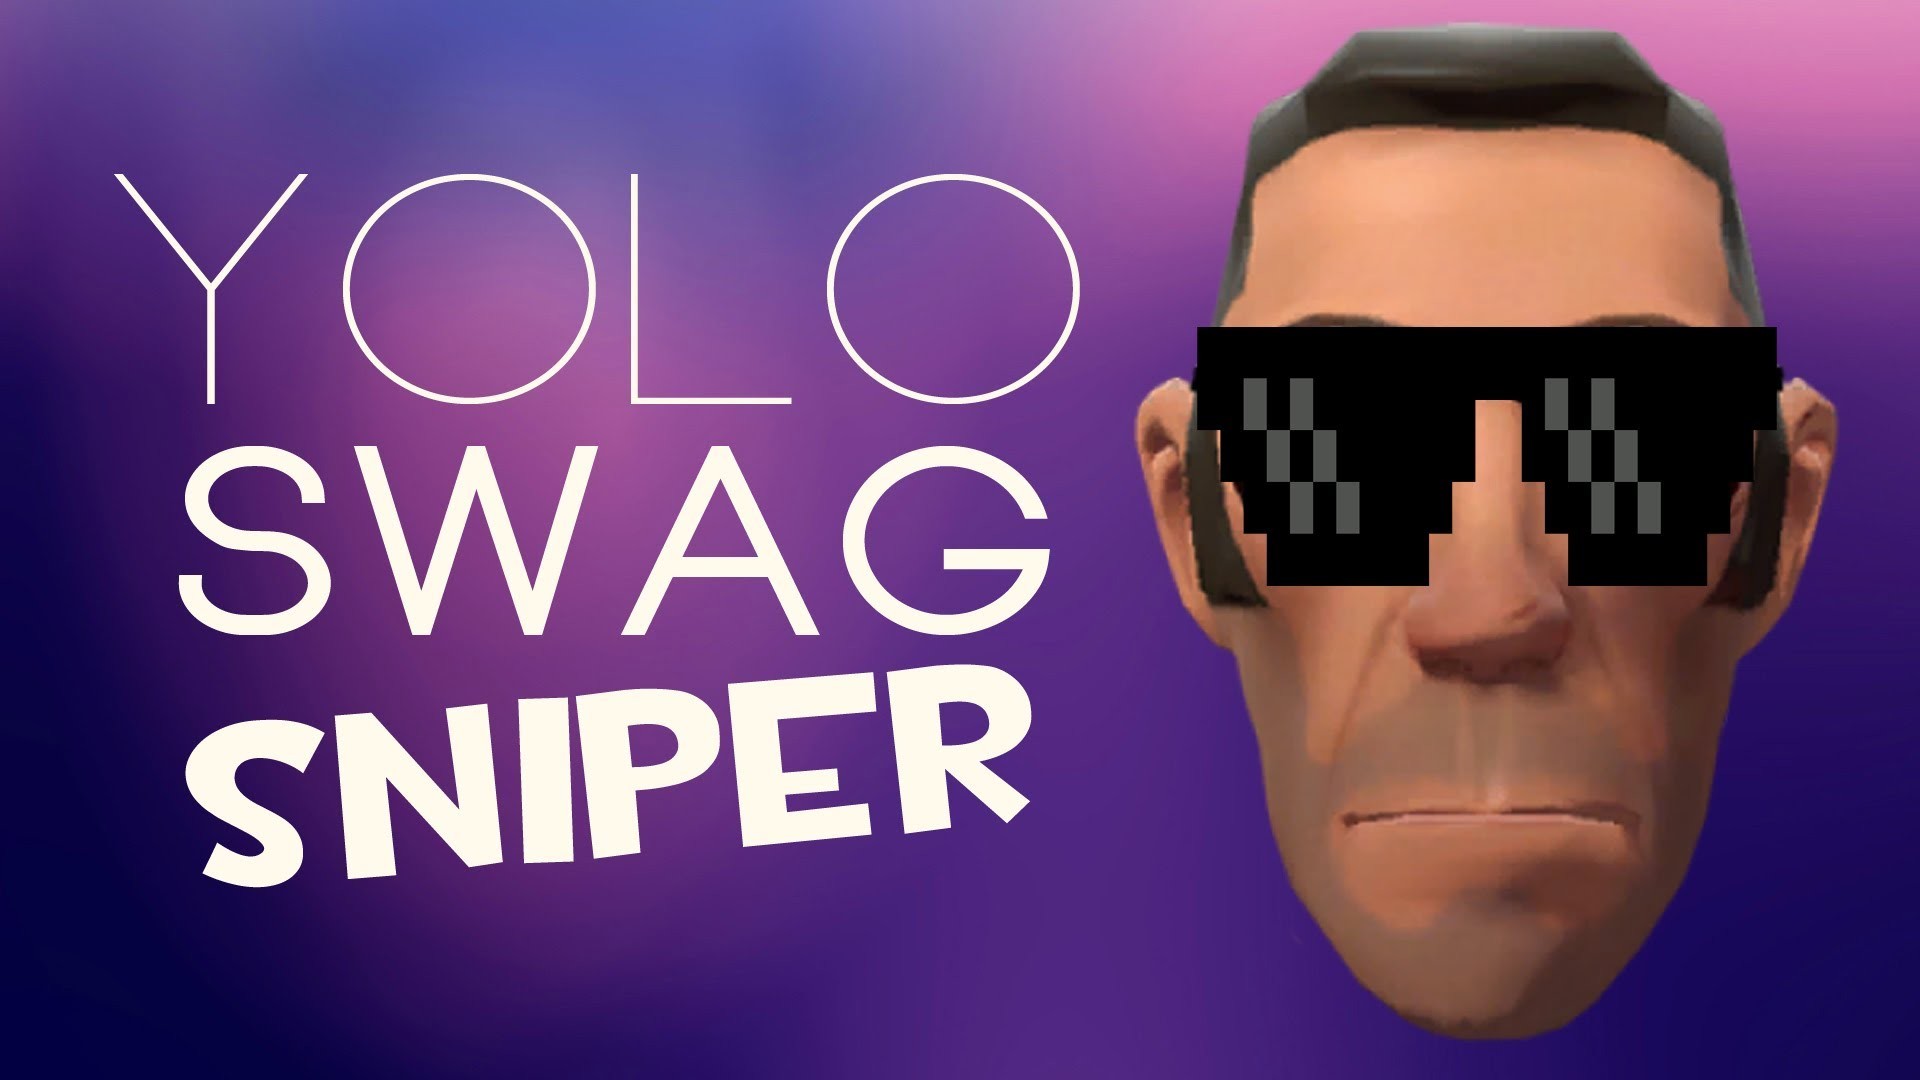 1920x1080 [Team Fortress 2] YOLO SWAG SNIPER - YouTube